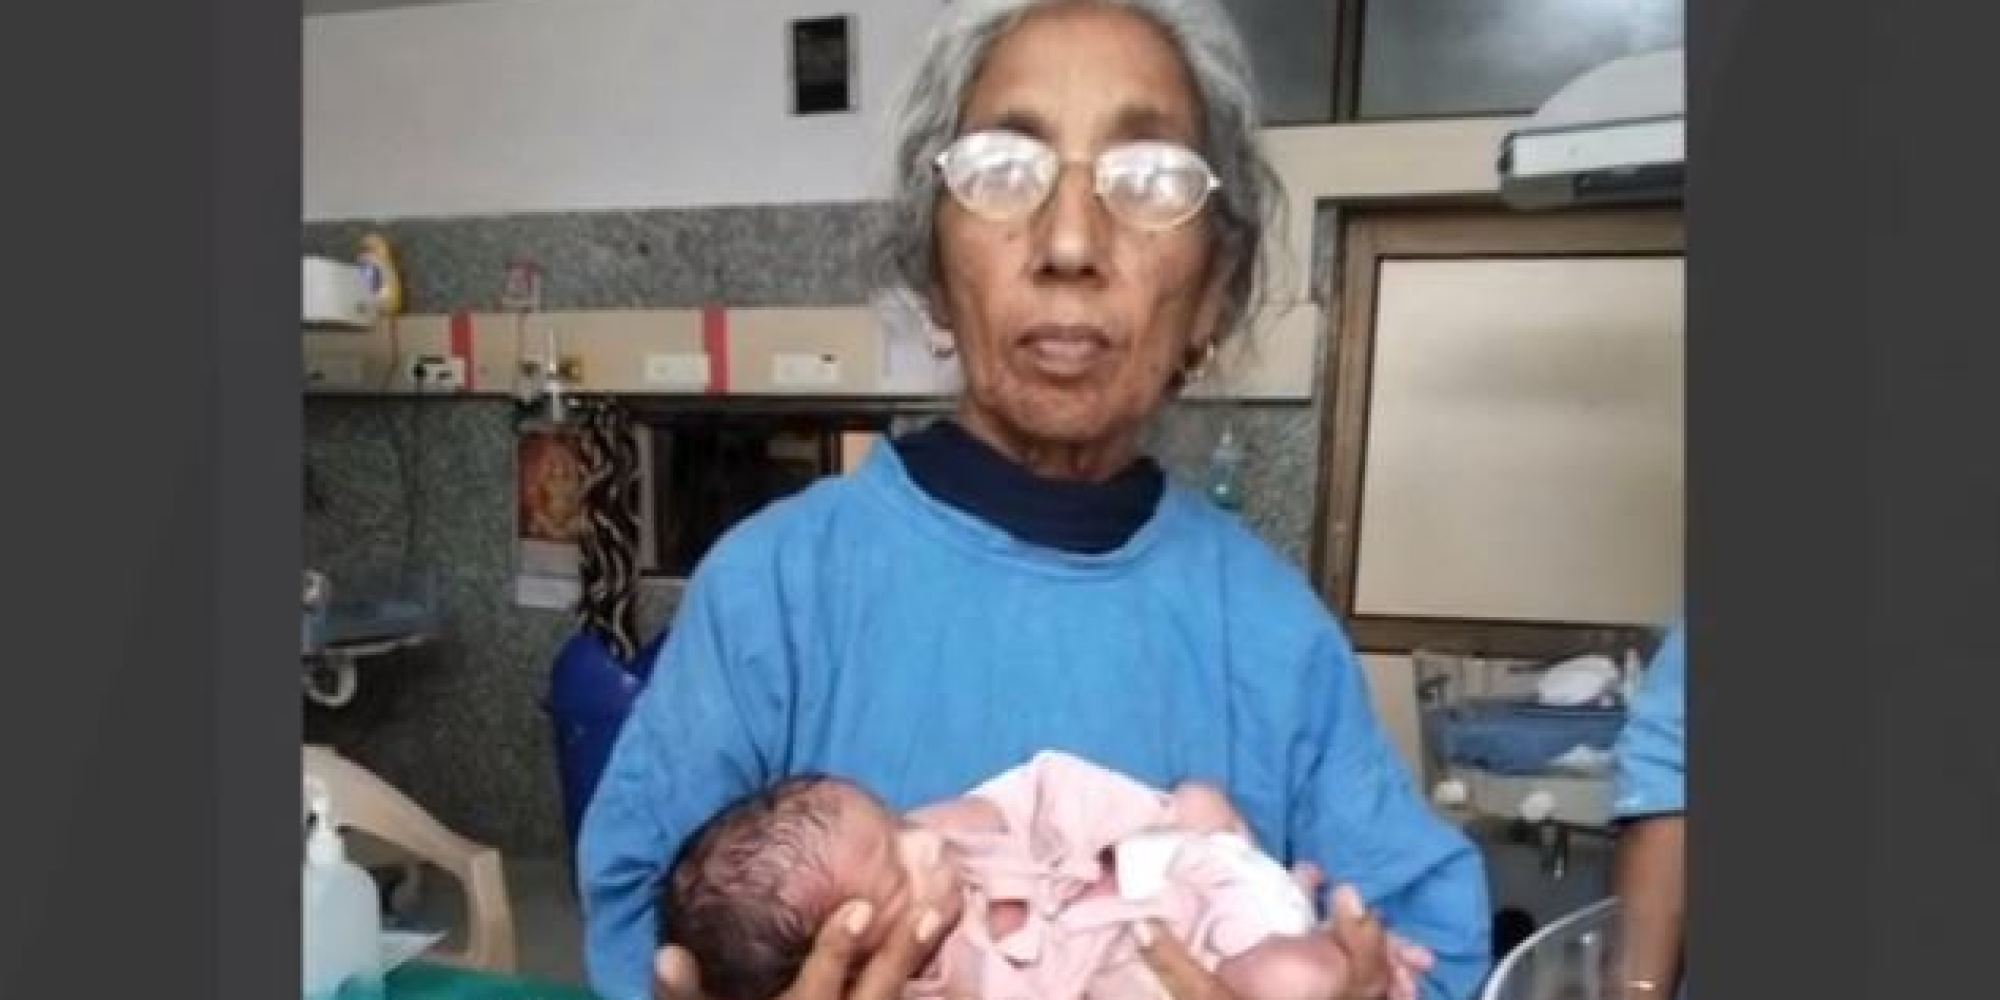 Doctors Raise Concerns After 72 Year Old Punjab Woman Gives Birth